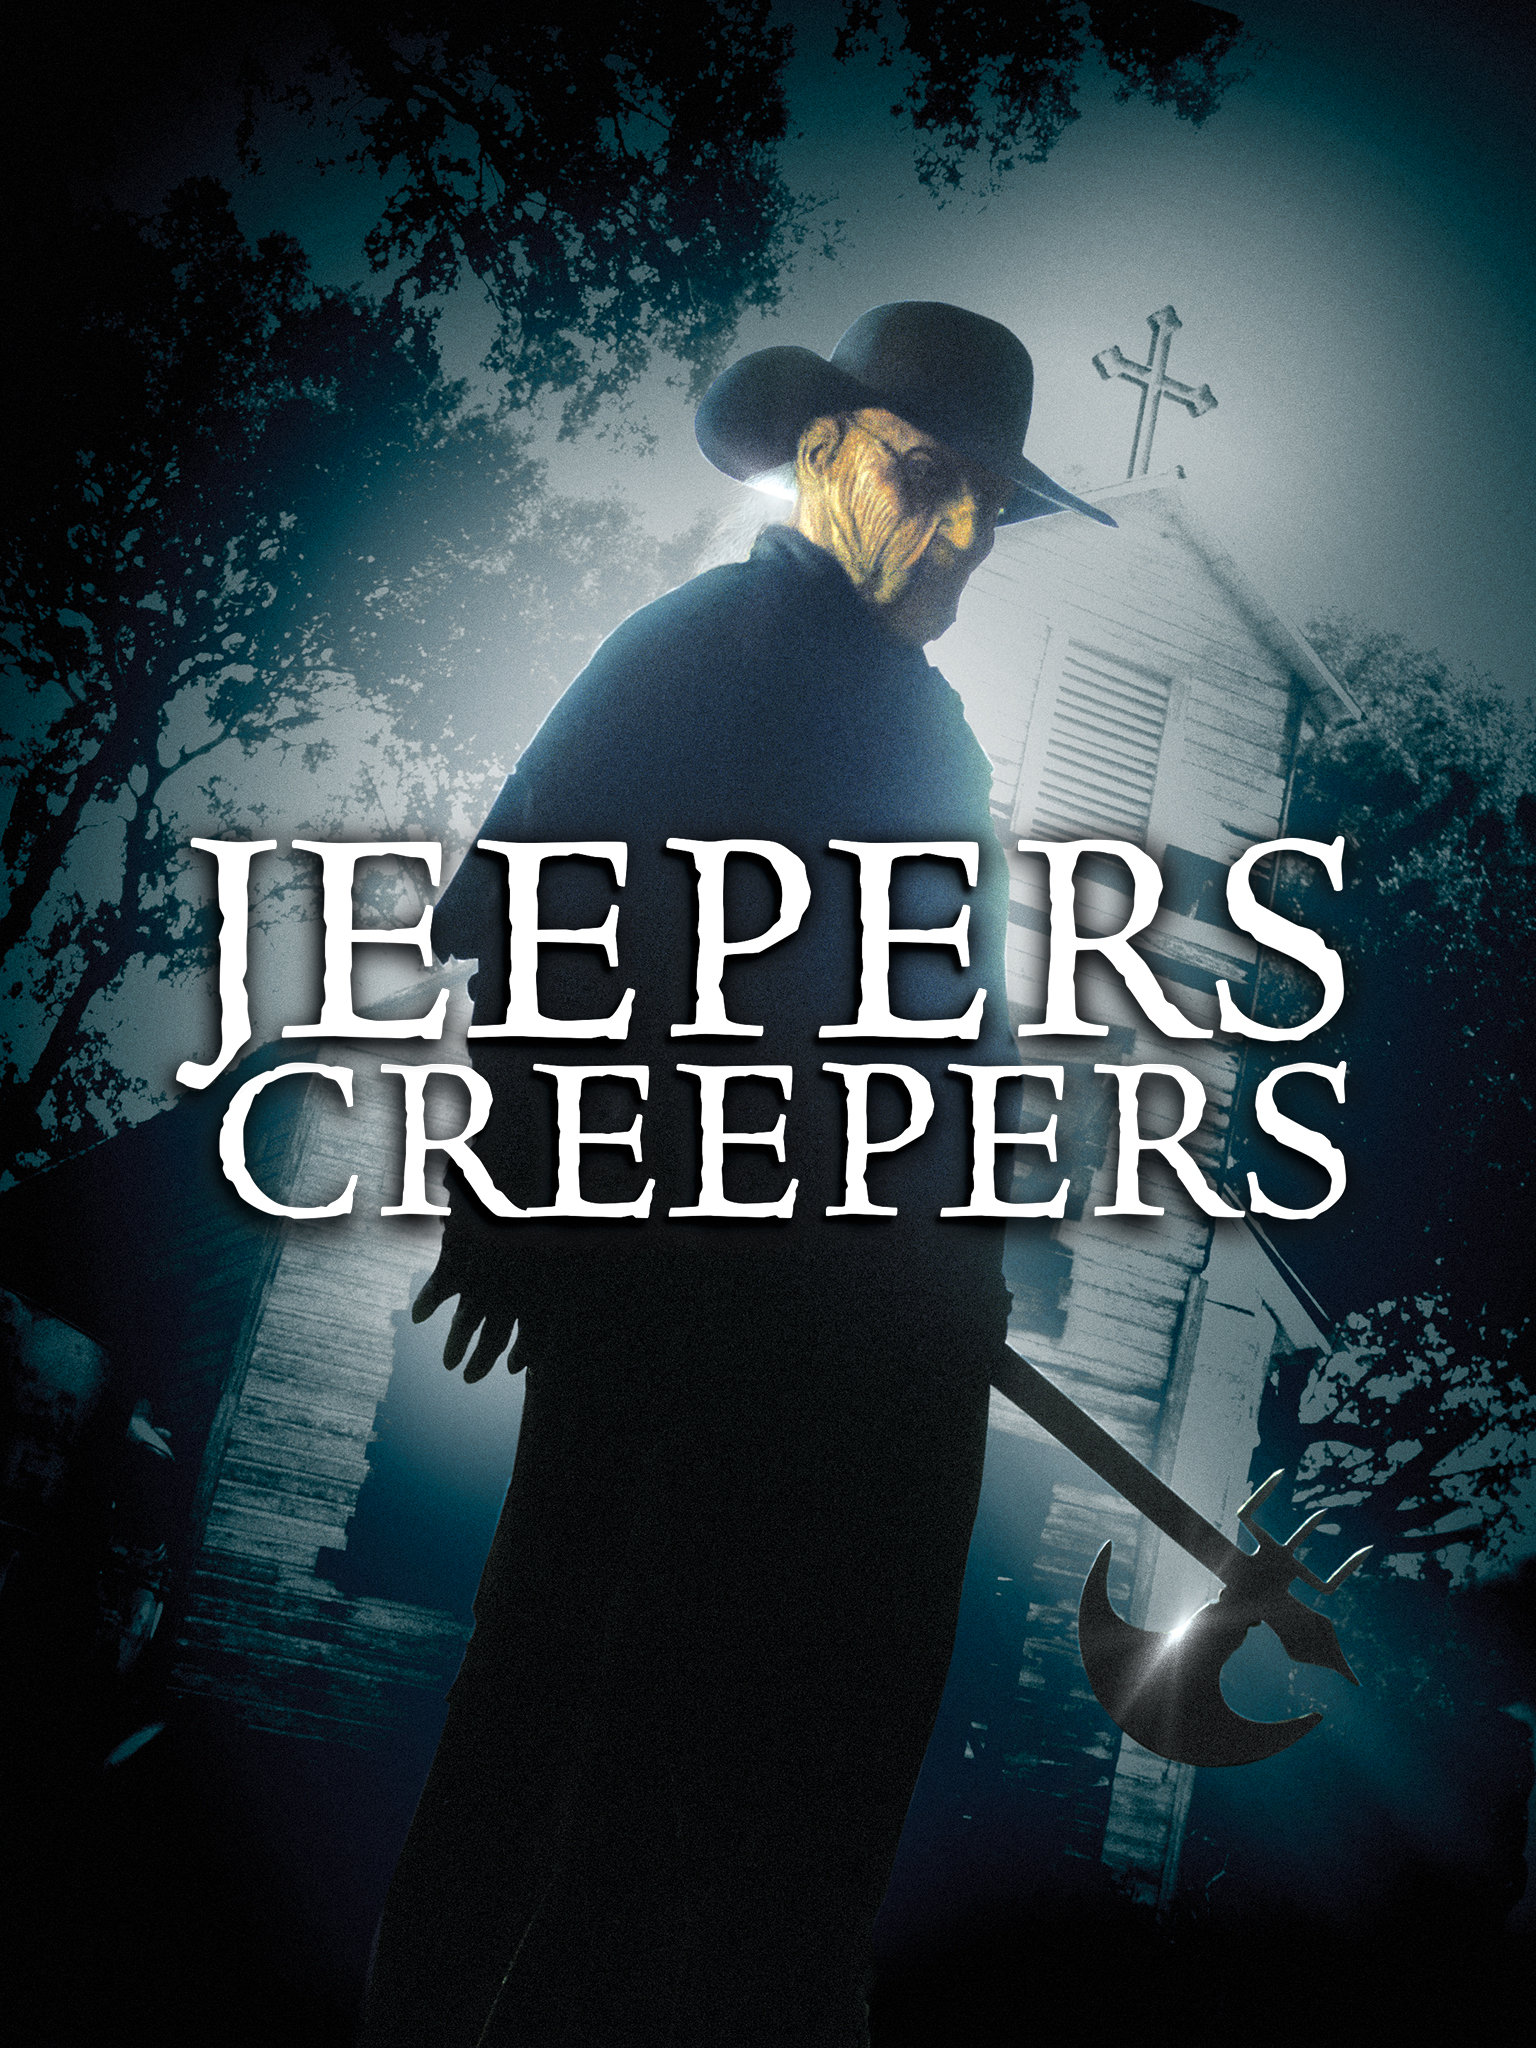 how to watch jeepers creepers